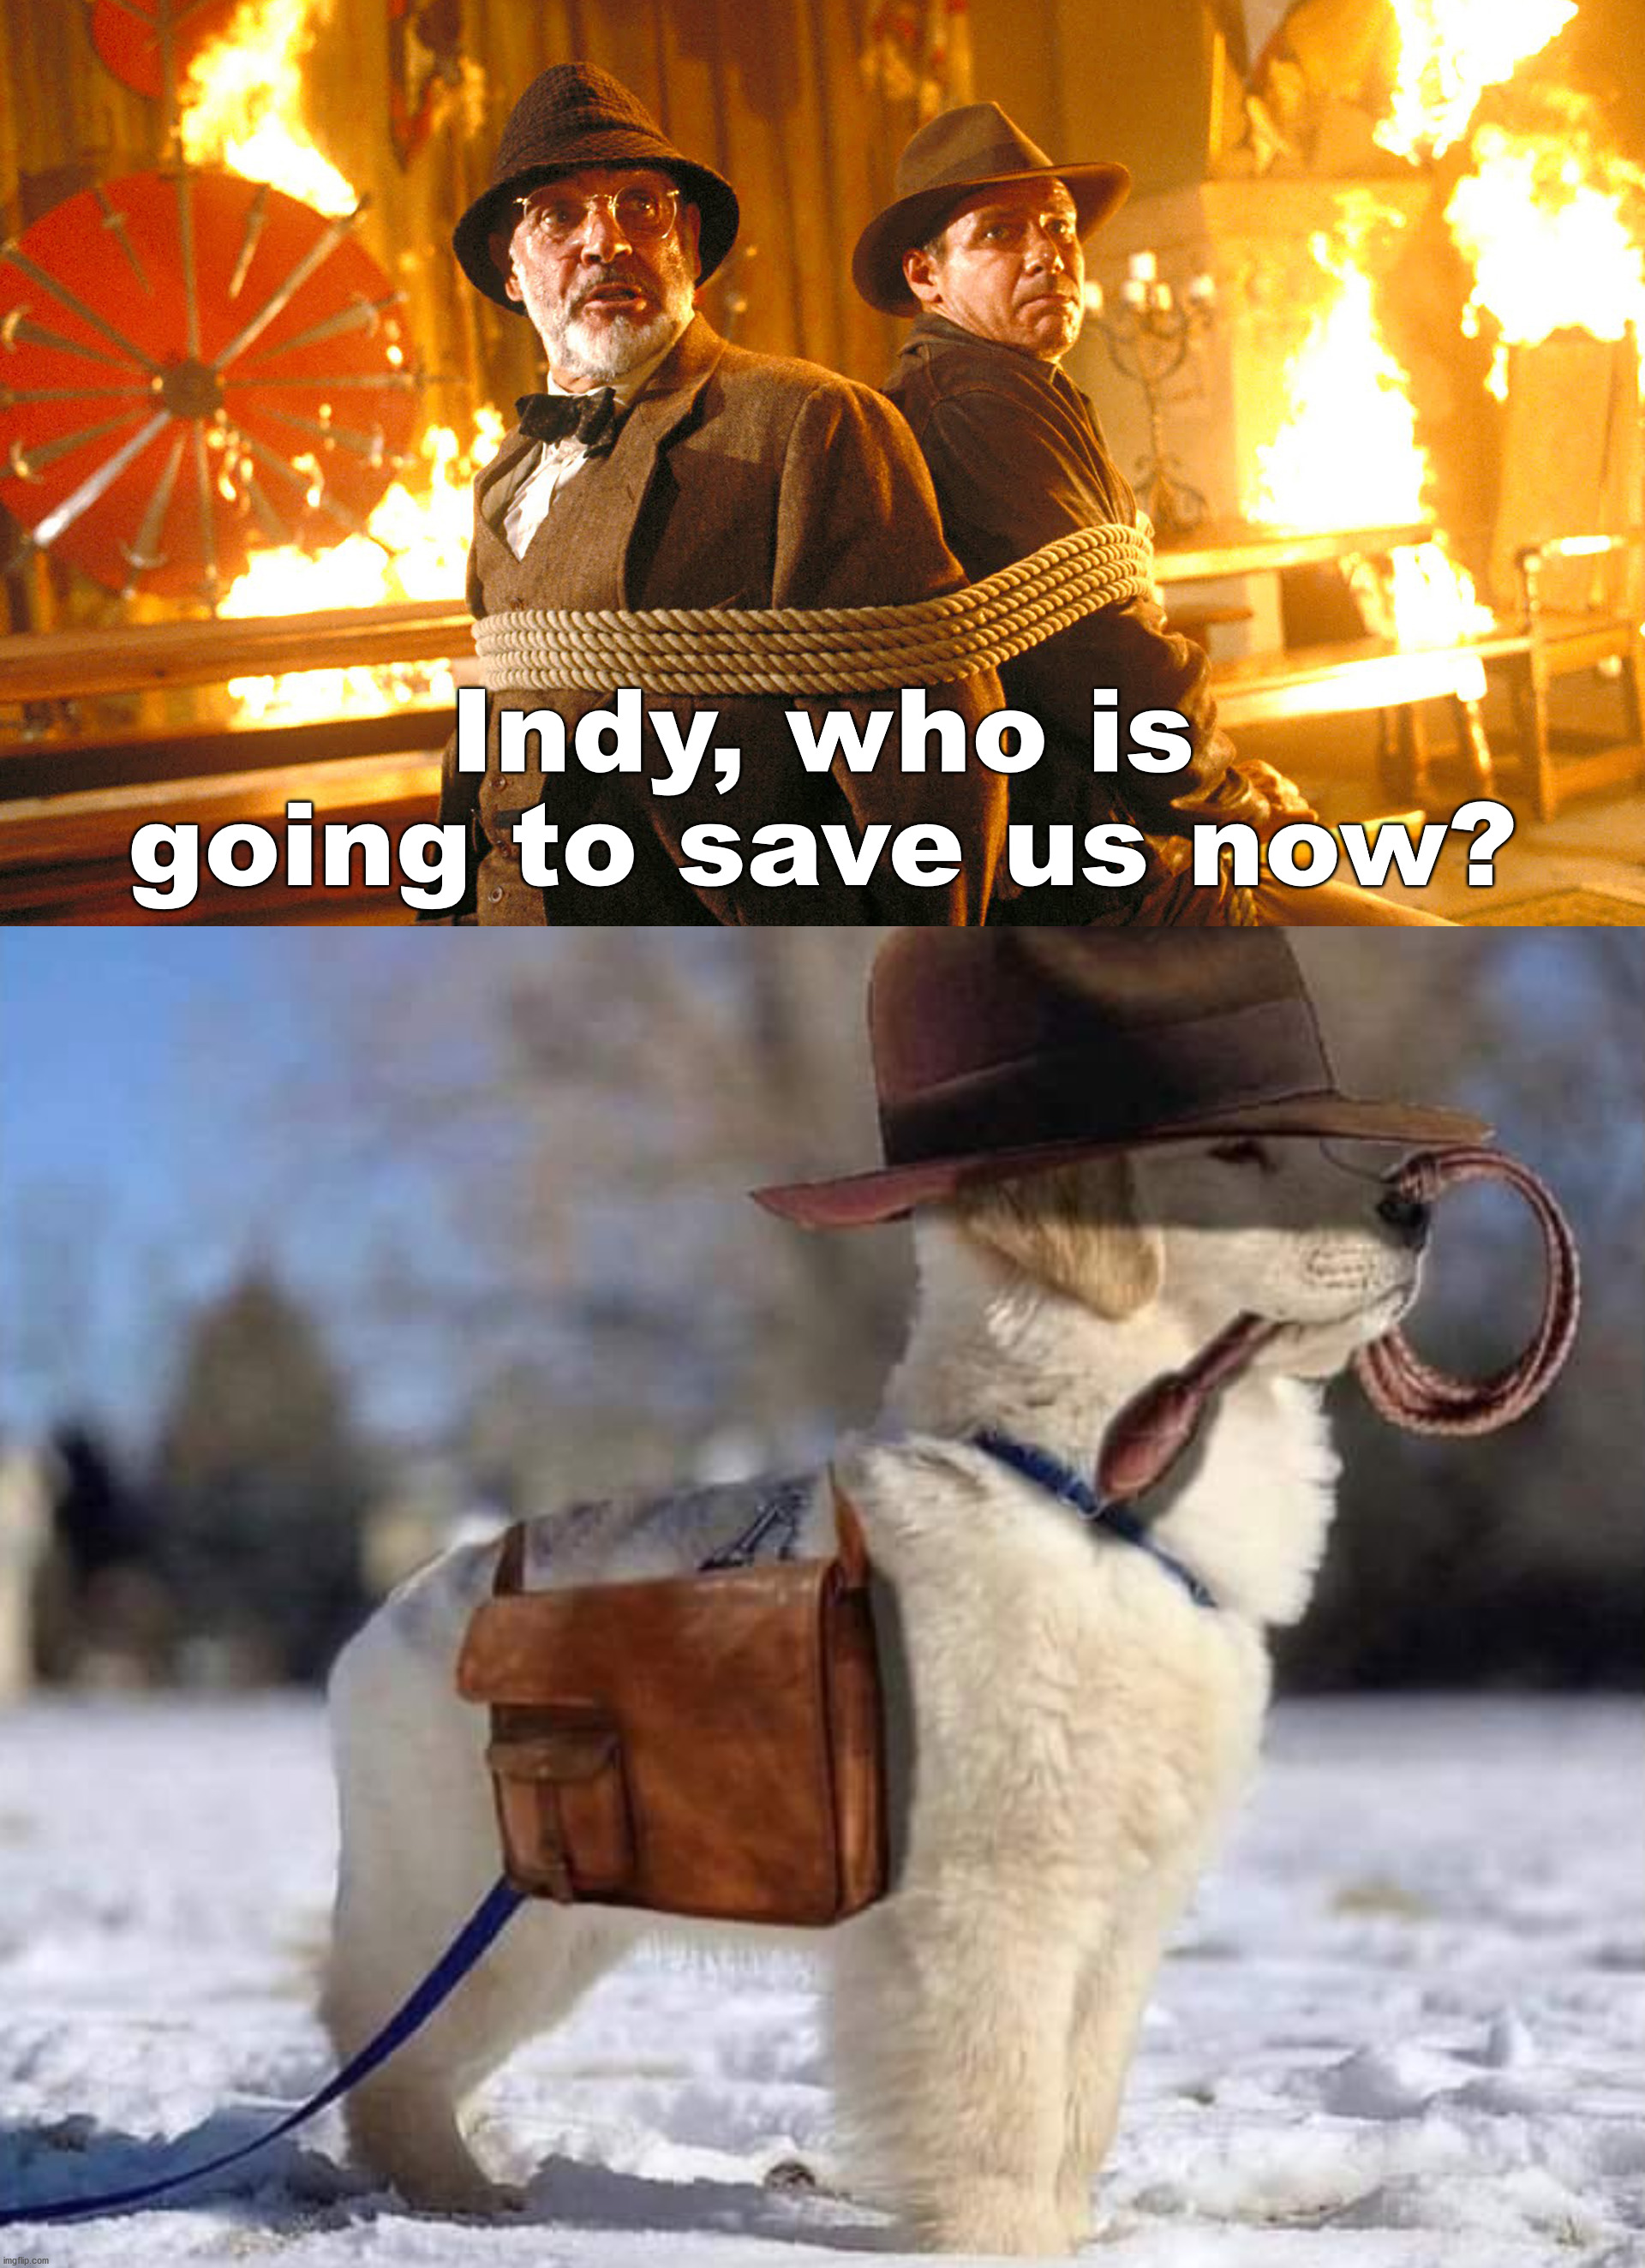 indiana bones - Indy, who is going to save us now?